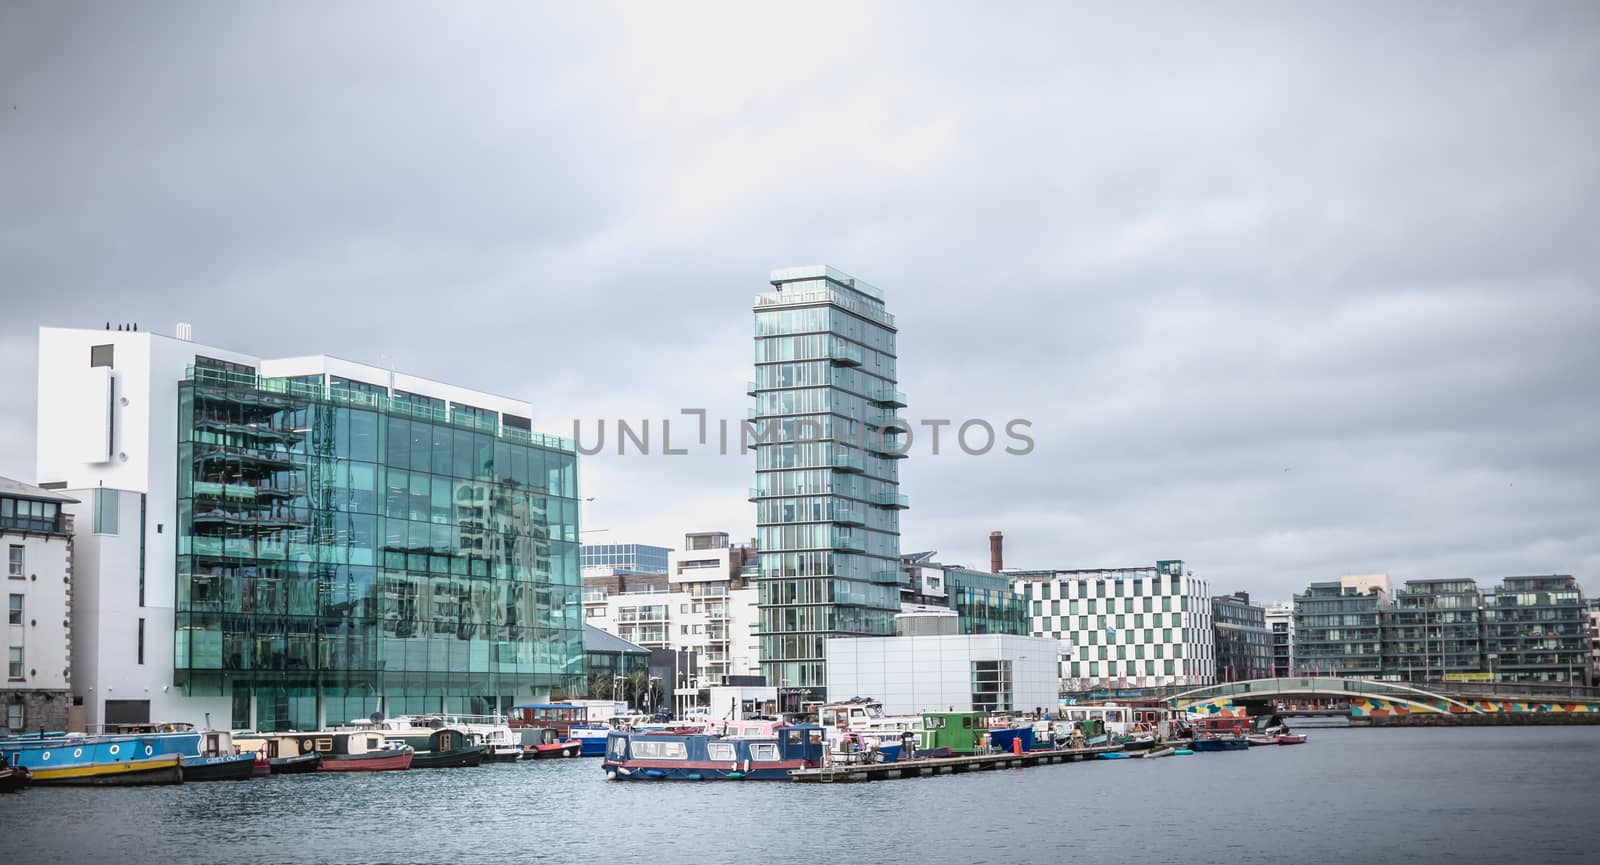 Dublin, Ireland - February 12, 2019: View of the Docklands district with its recent buildings forming part of the International Financial Services Center (IFSC) on a winter day